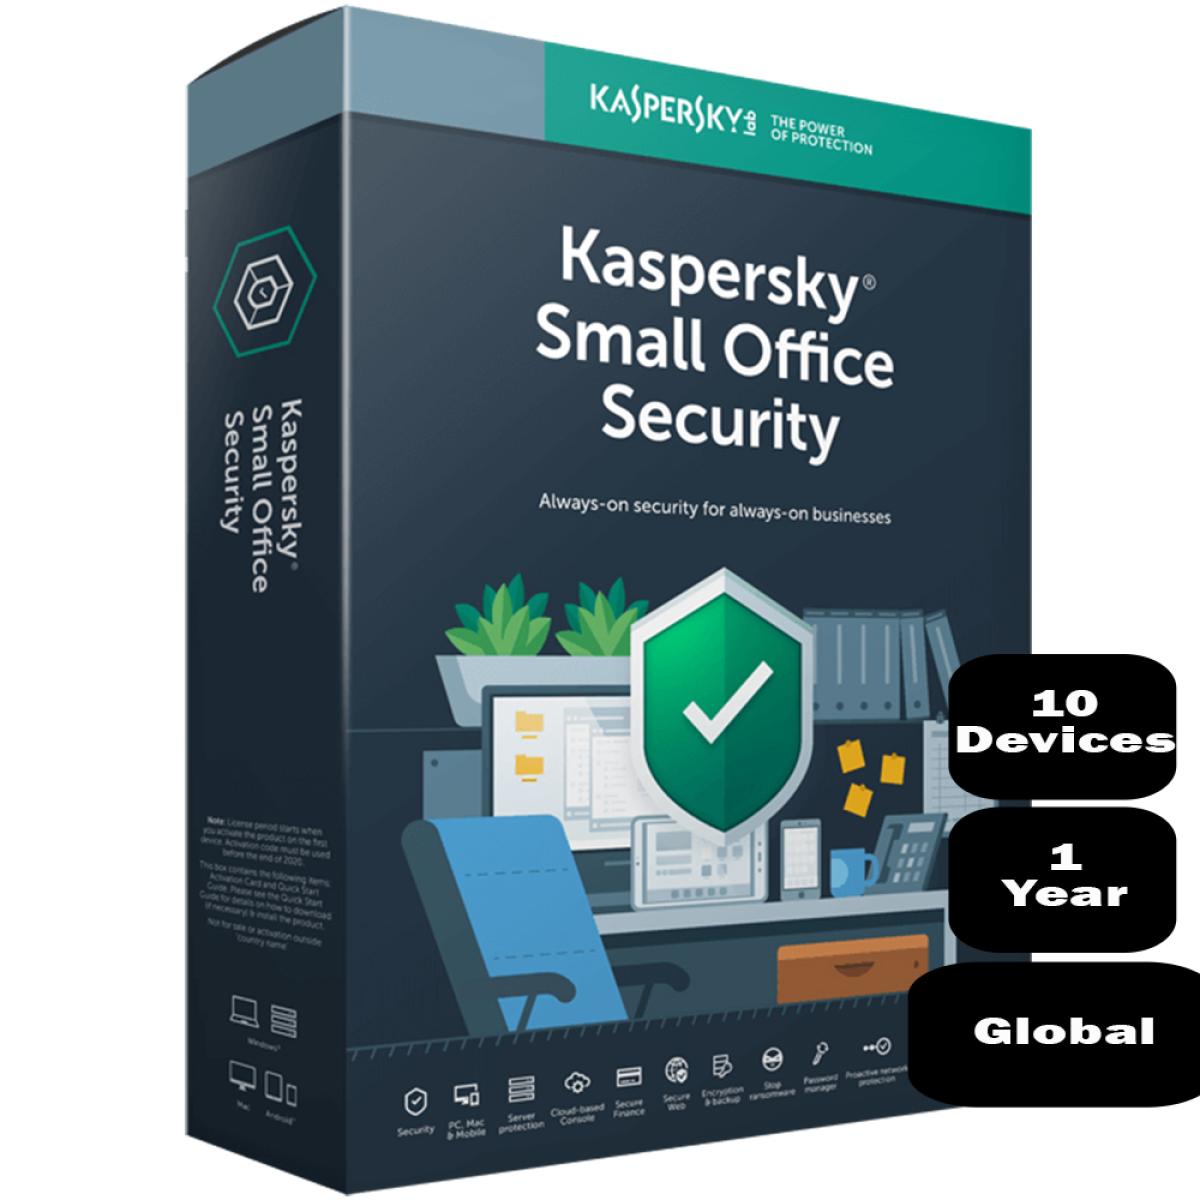 Kaspersky Small Office Security 10 Devices,1 Year In Jordan